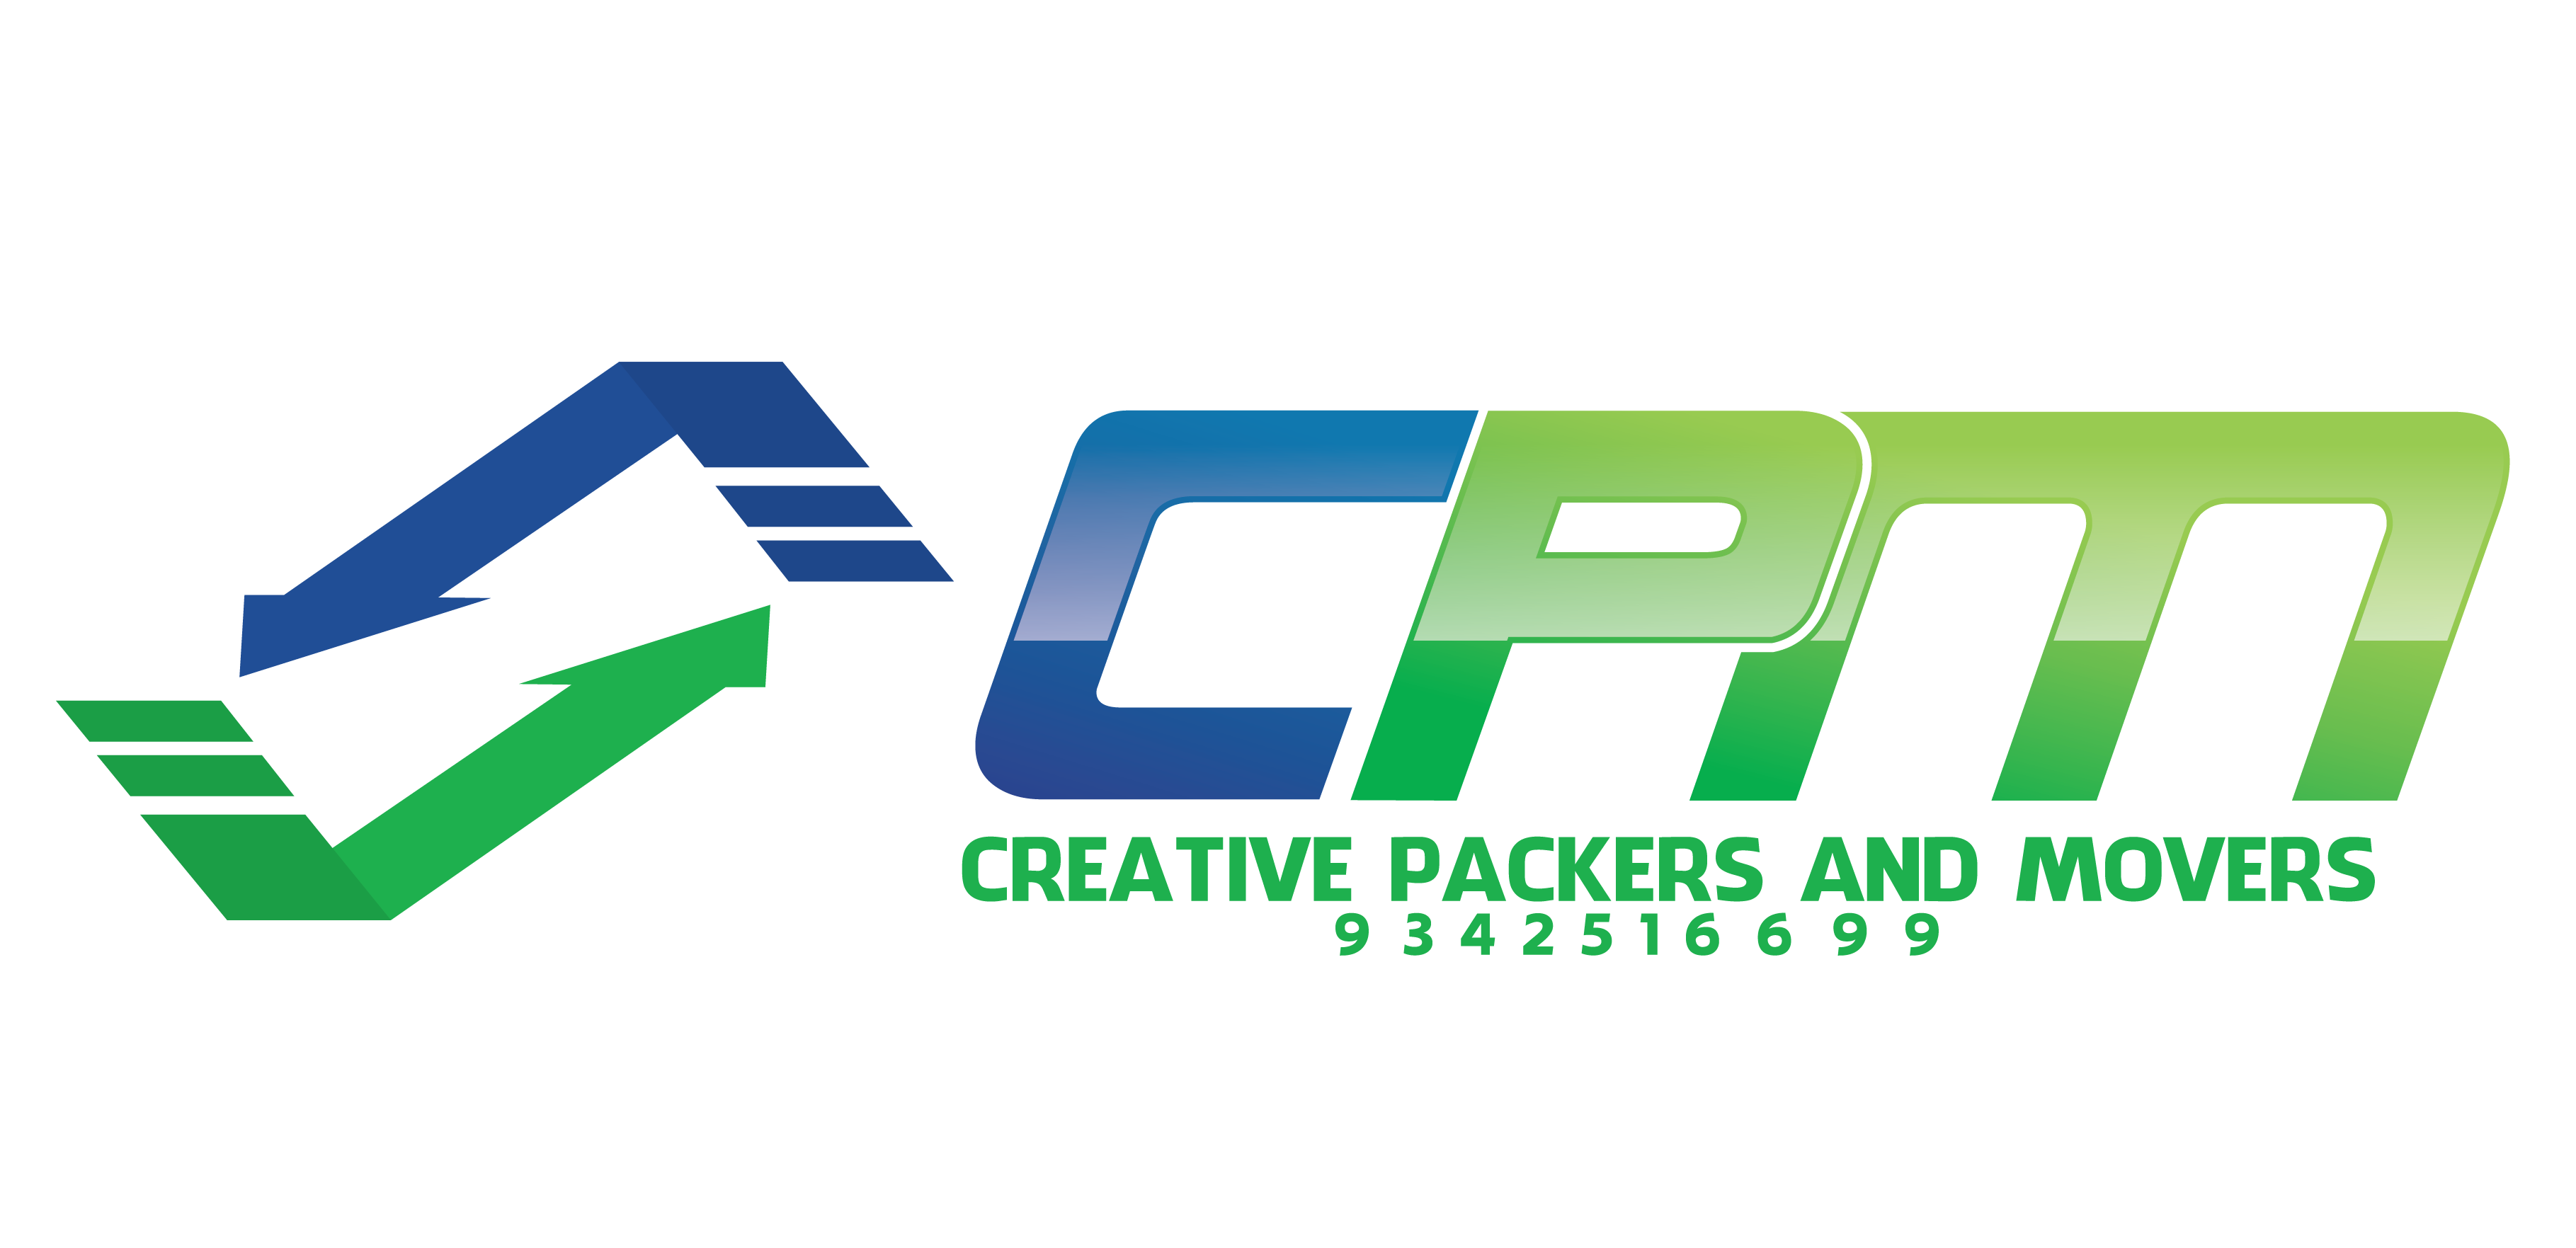 Creative Packers And Movers